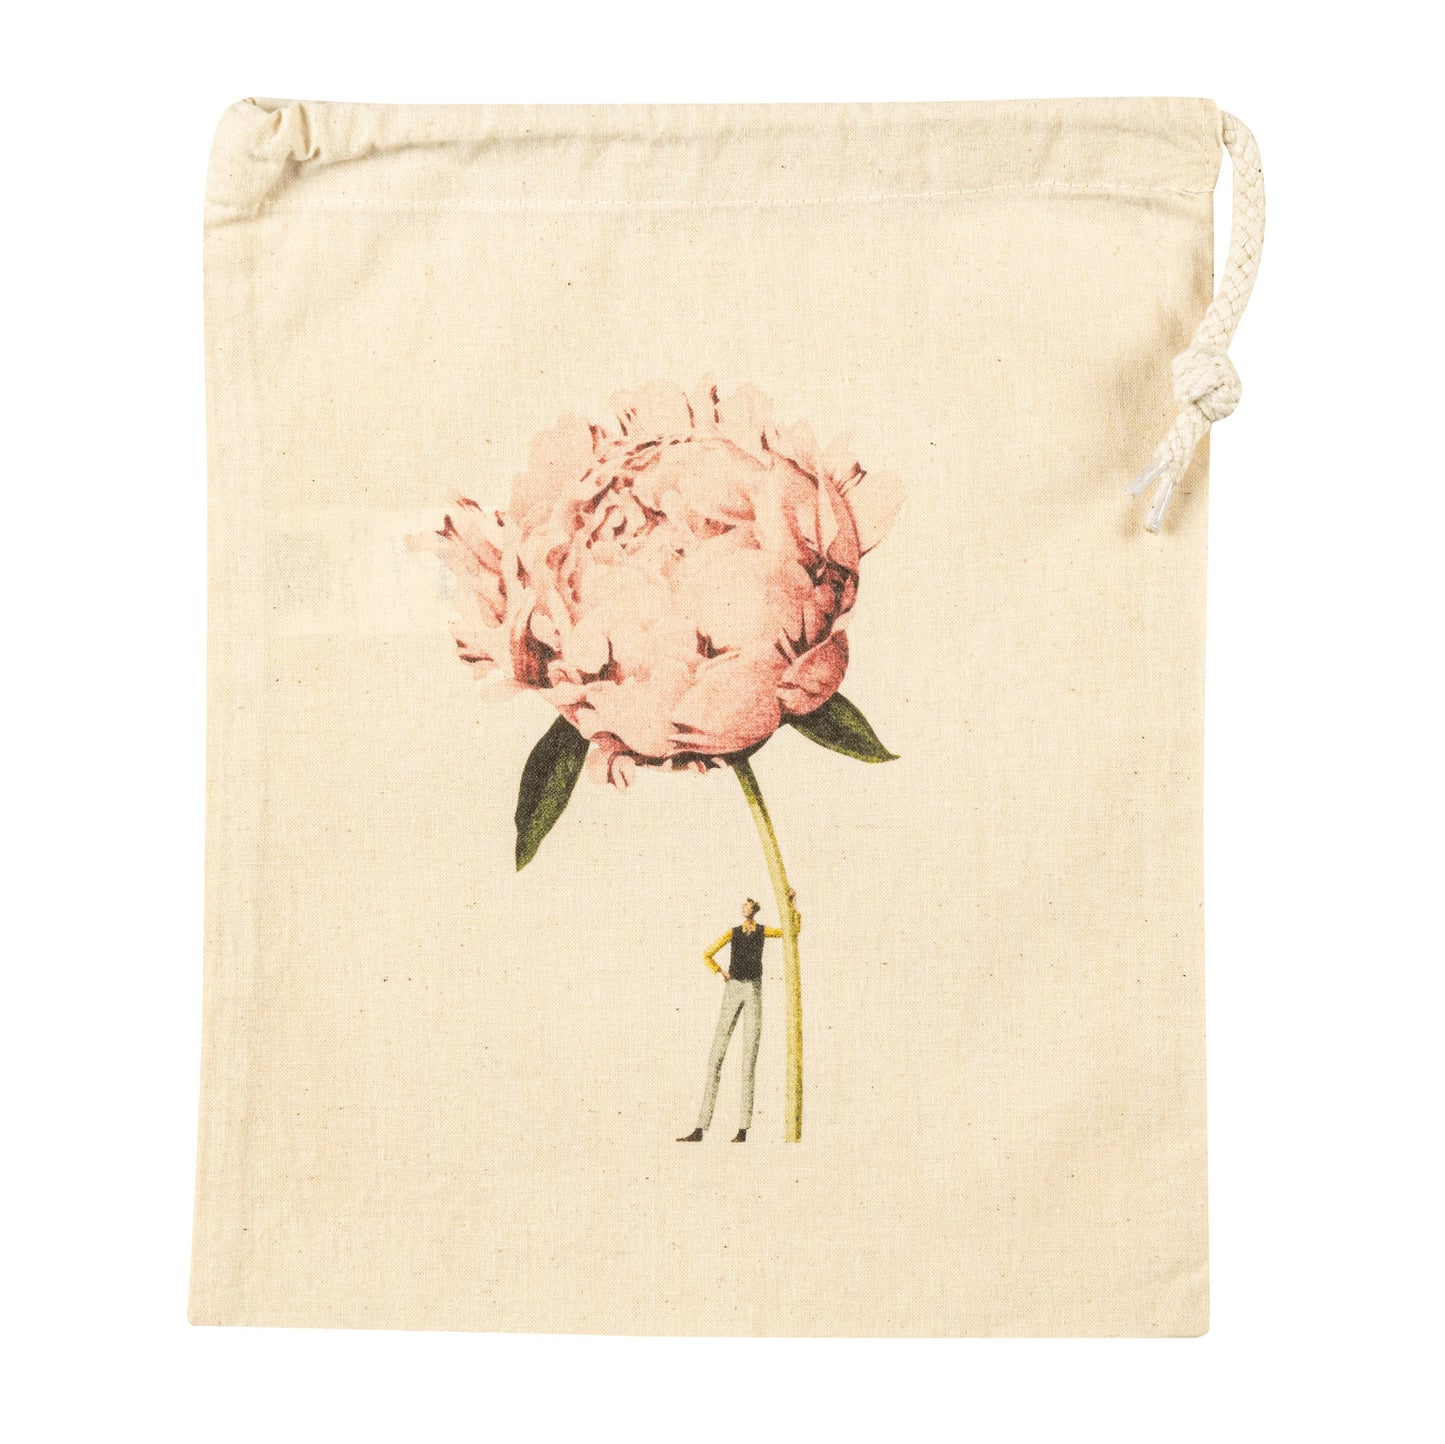 Drawstring Bag - In Bloom Pink Peony small